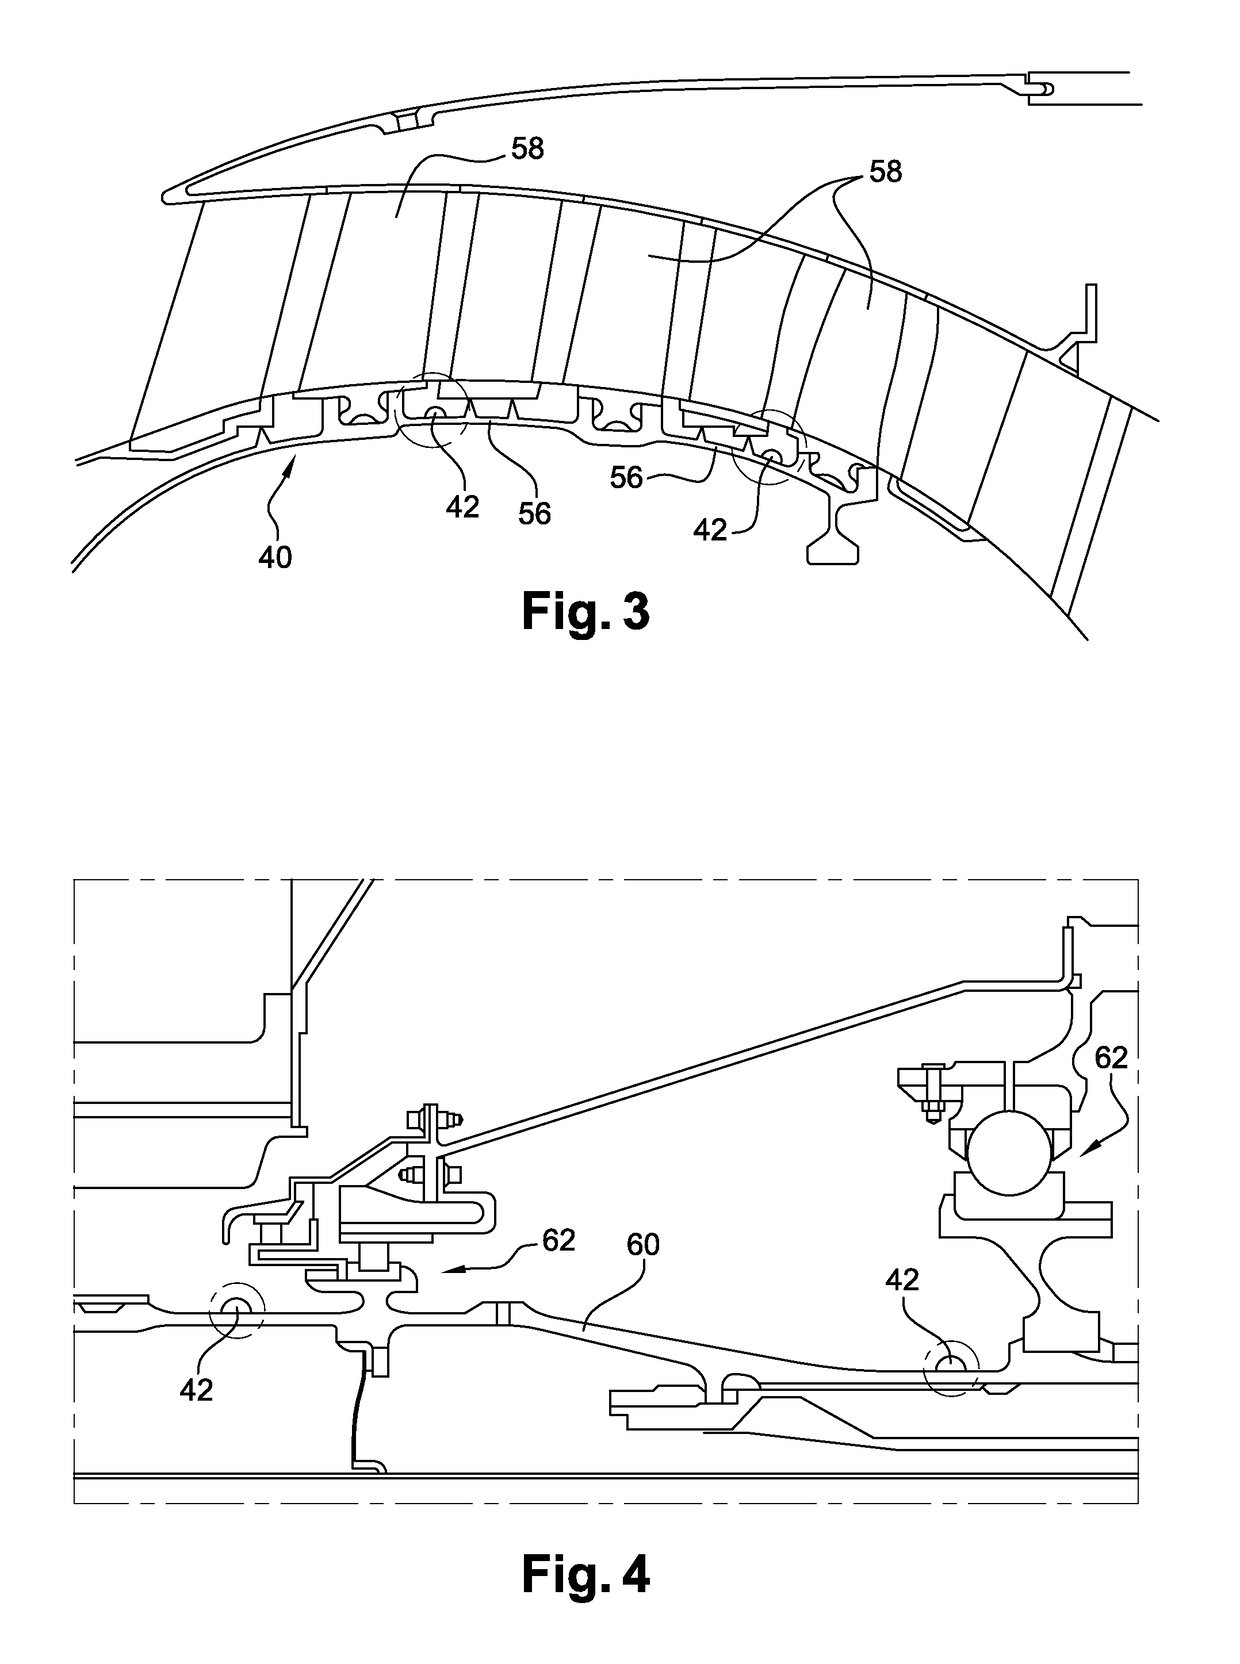 Method for measuring the kinematics of at least one turbomachine rotor